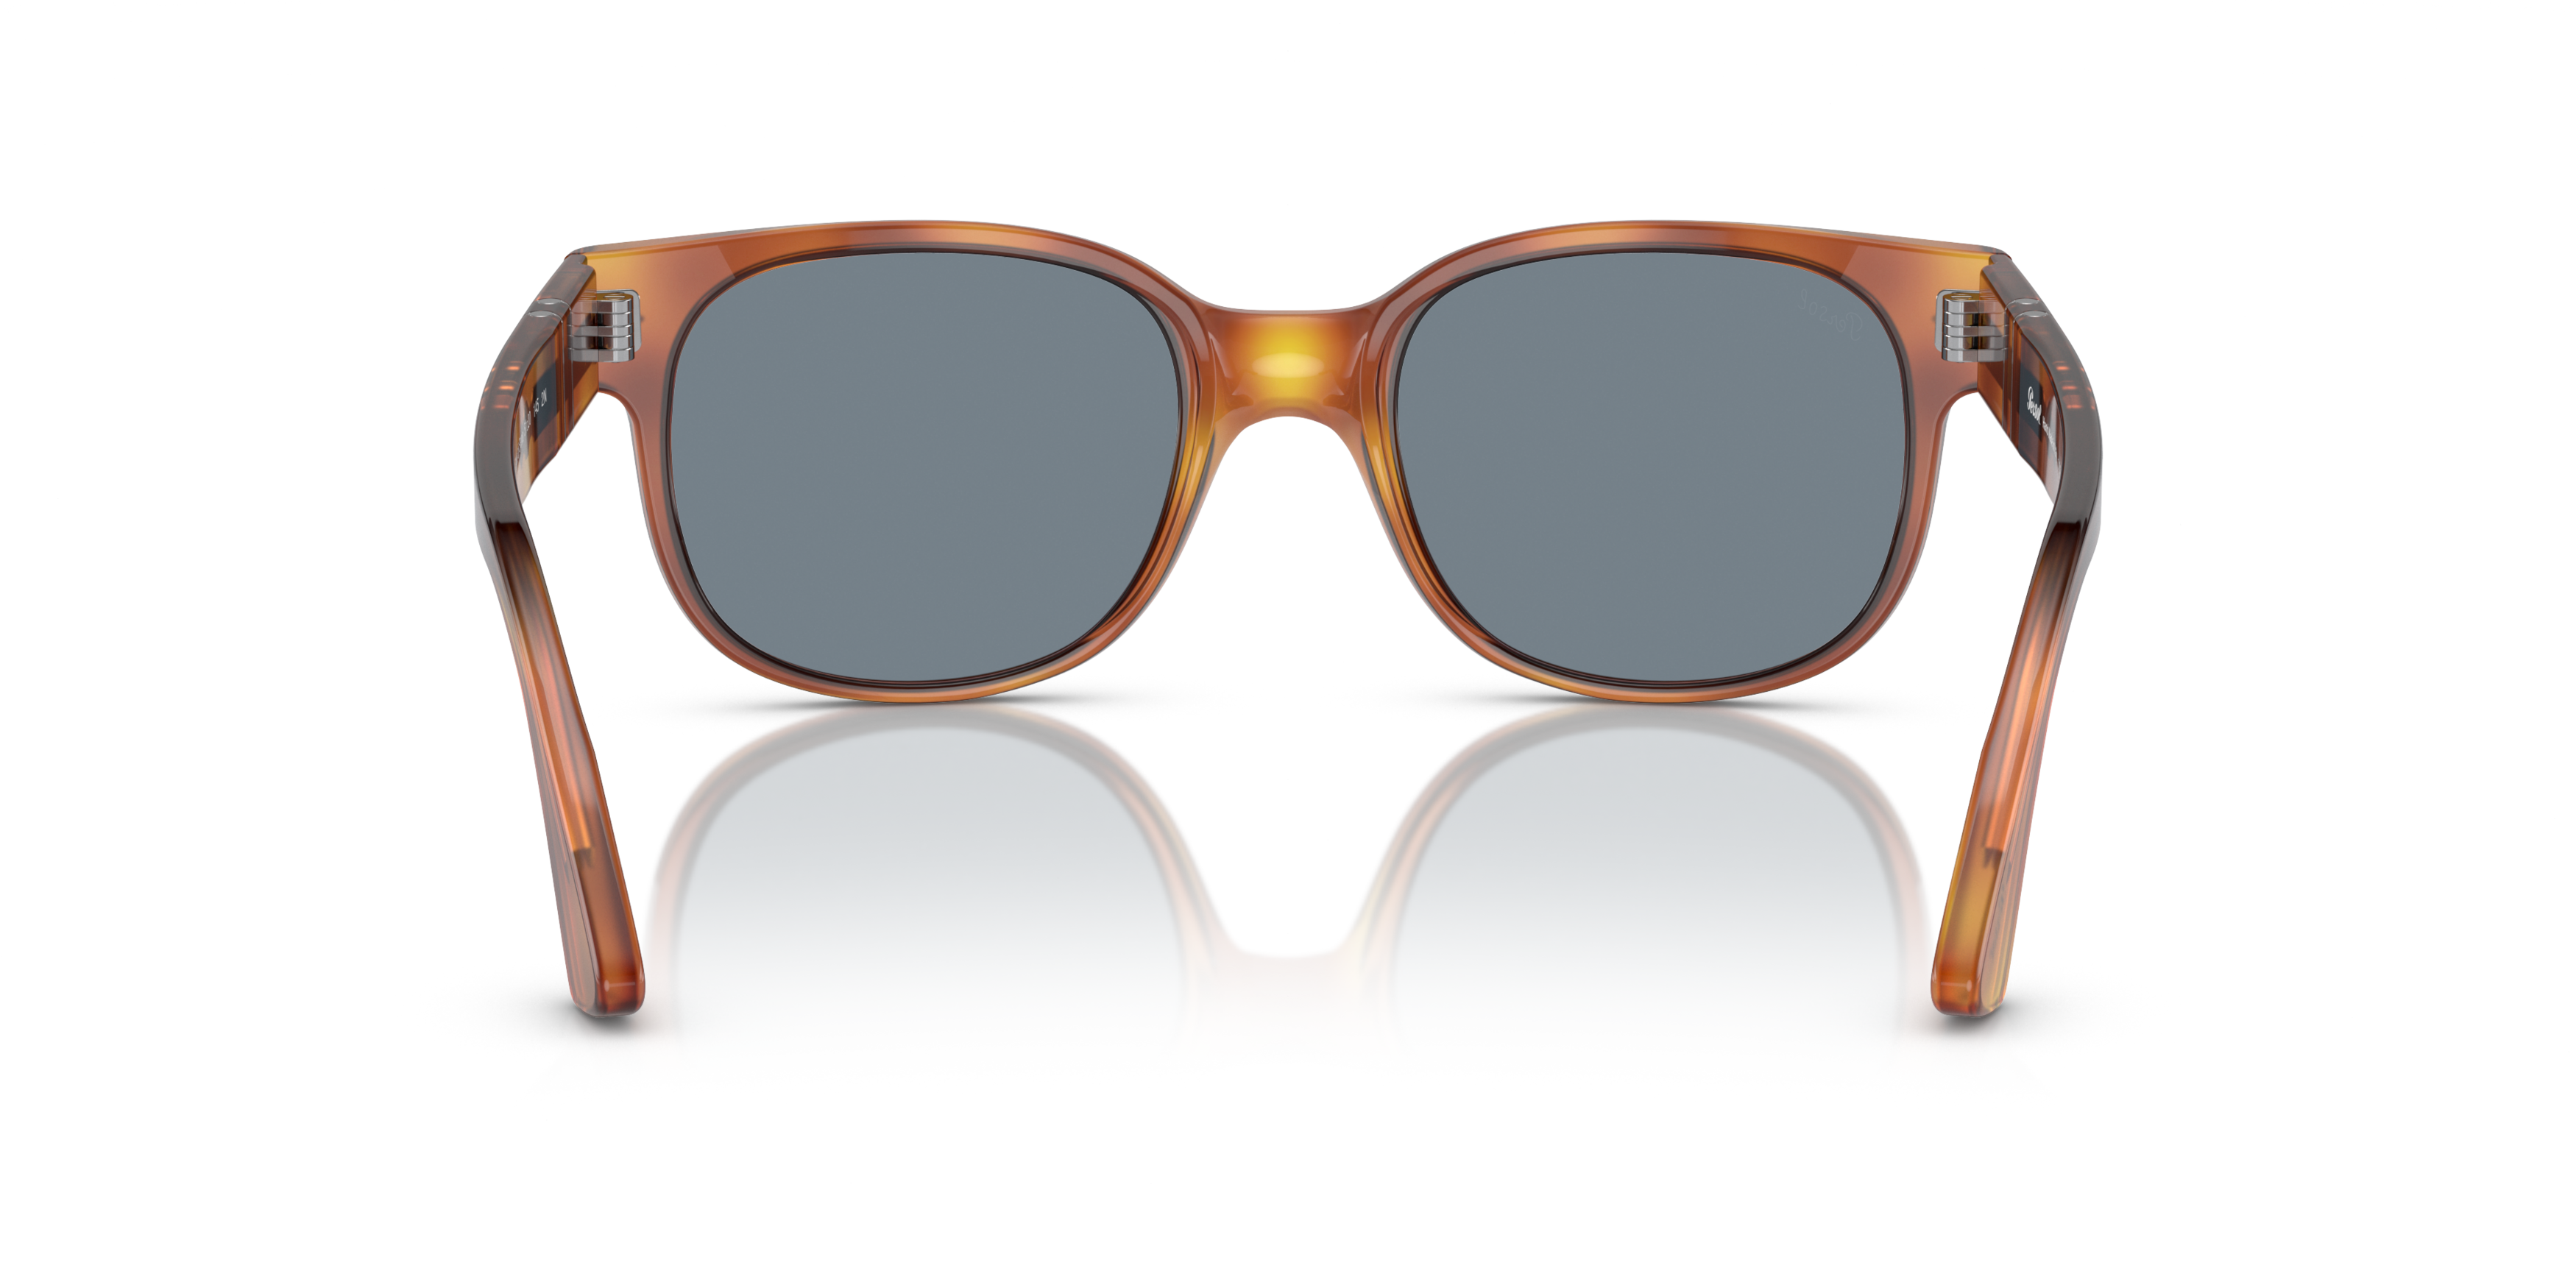 [products.image.detail02] Persol 0PO3257S 96/56